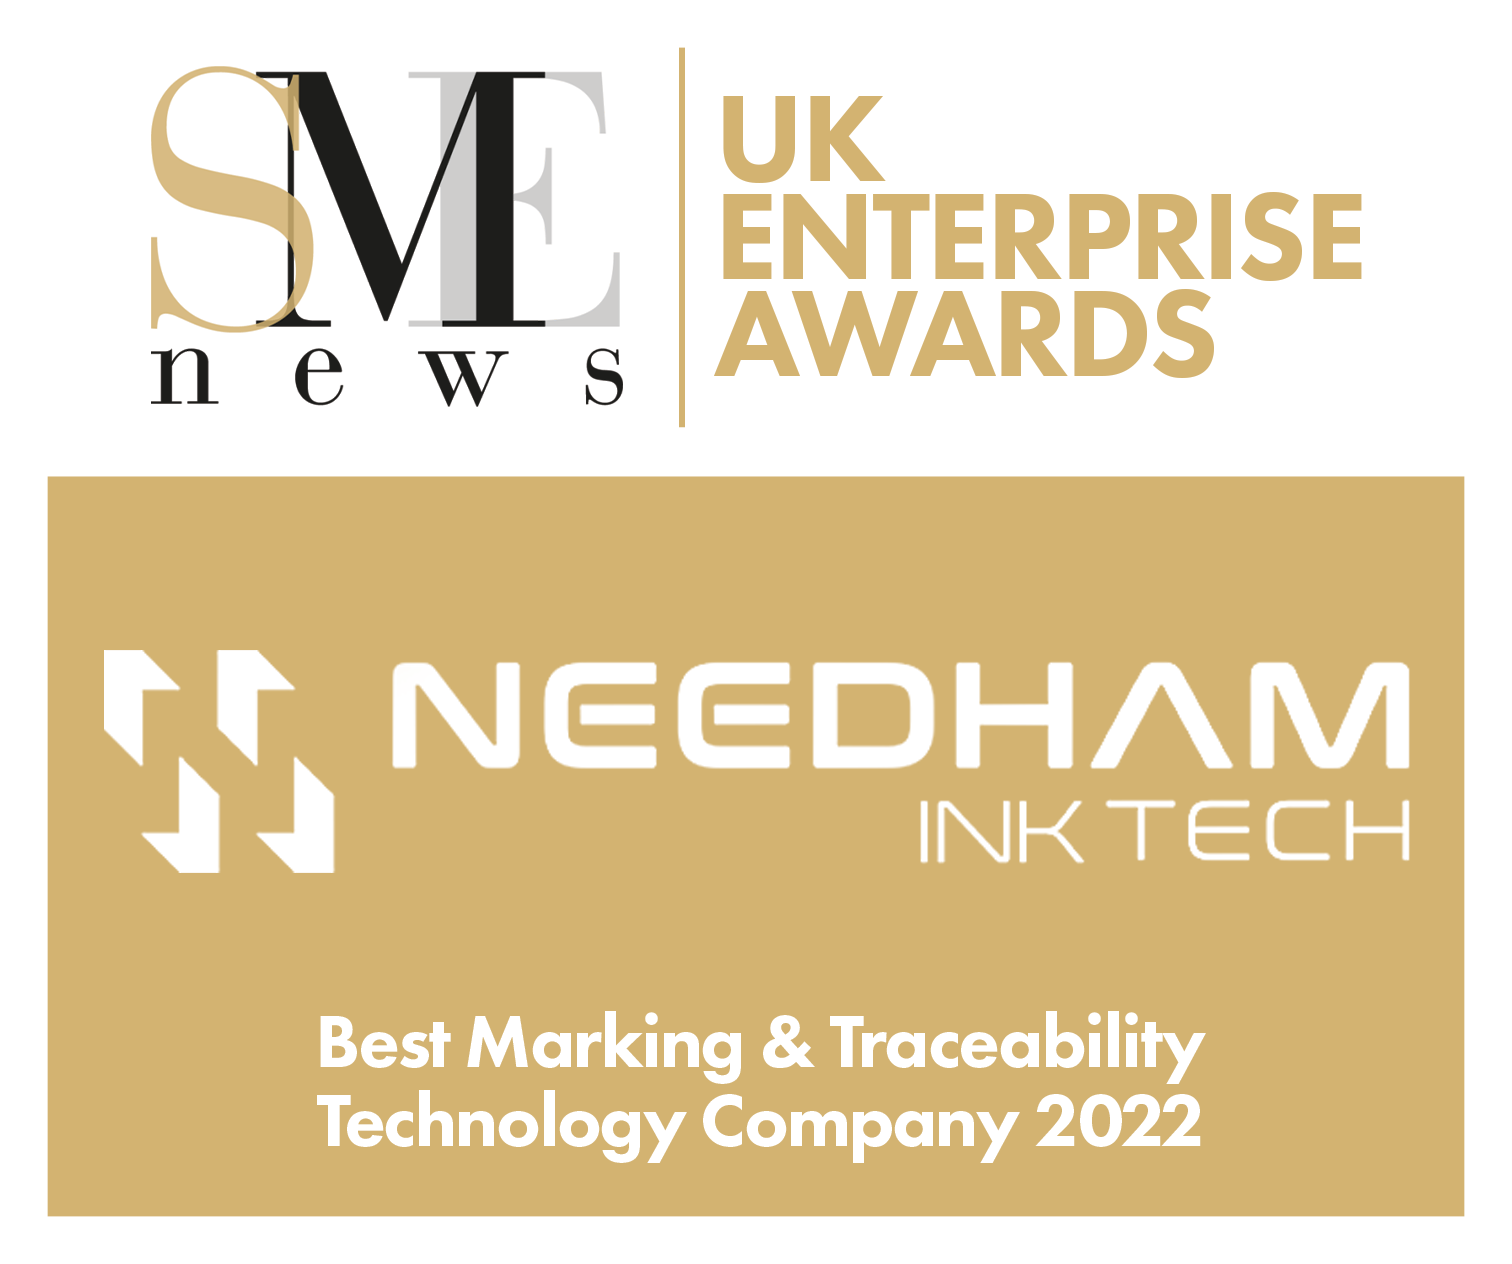 Needham Ink Tech Ends 2022 With Industry Award